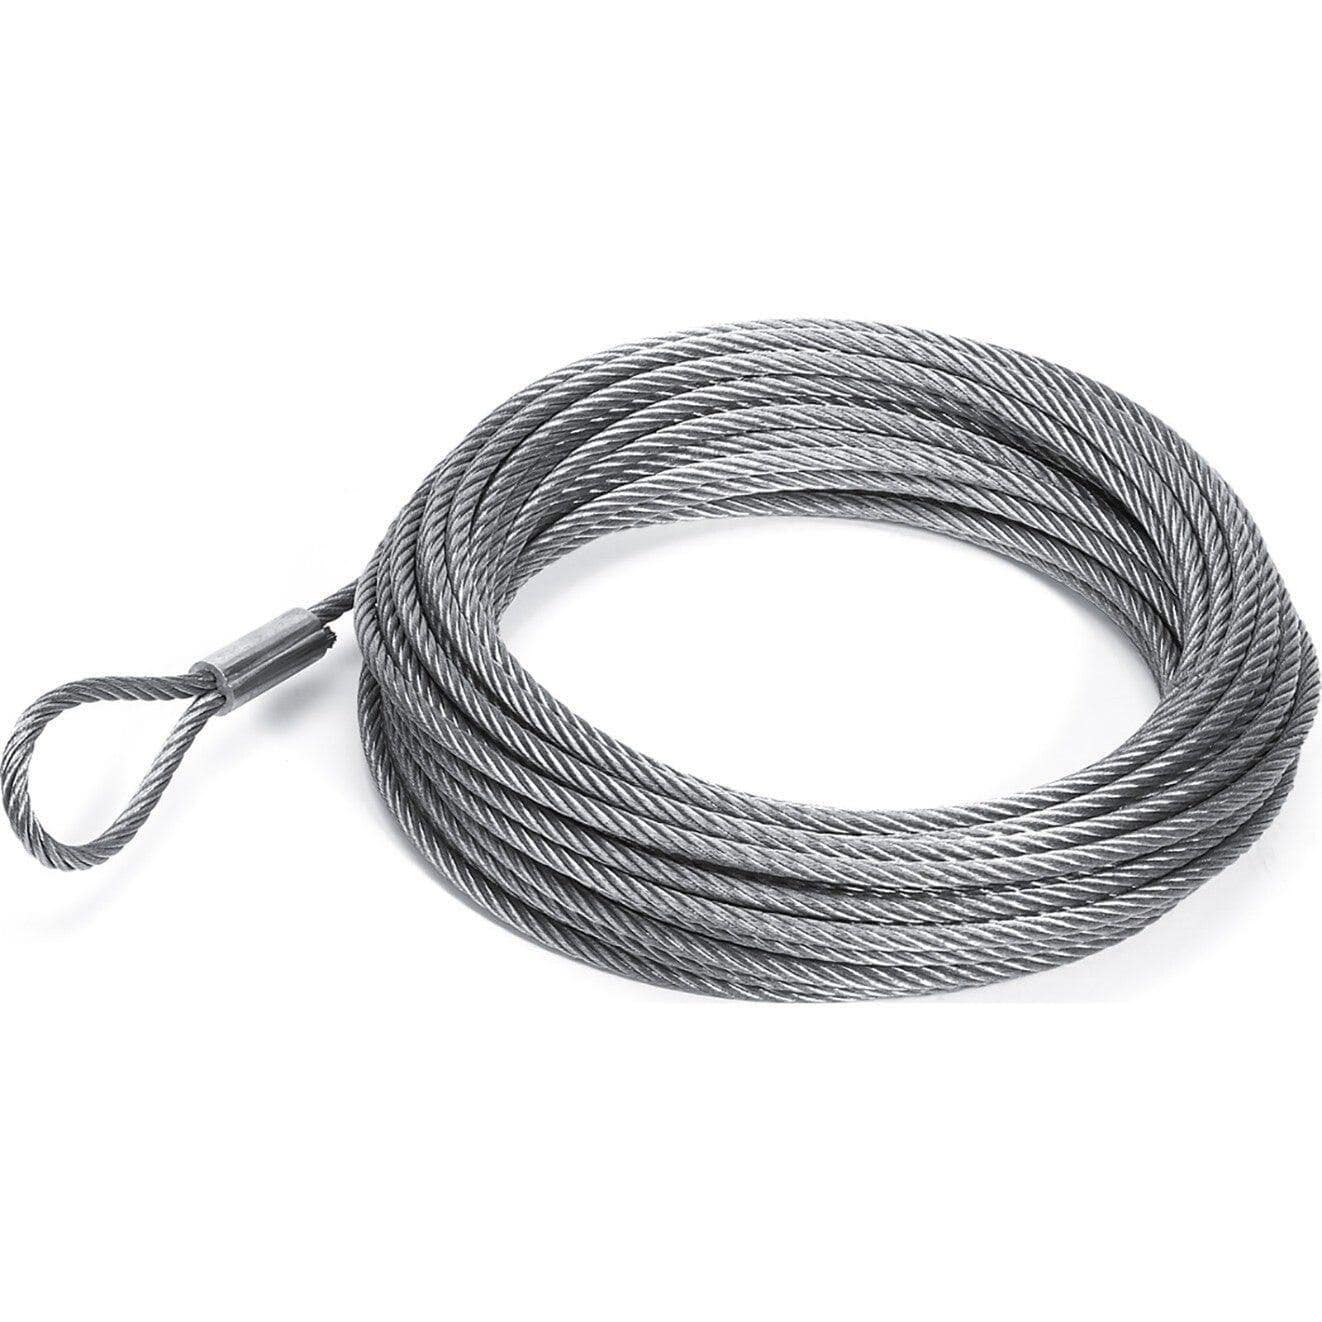 Wire Rope Replacement - 47' of 1/4" - Factory Recreation